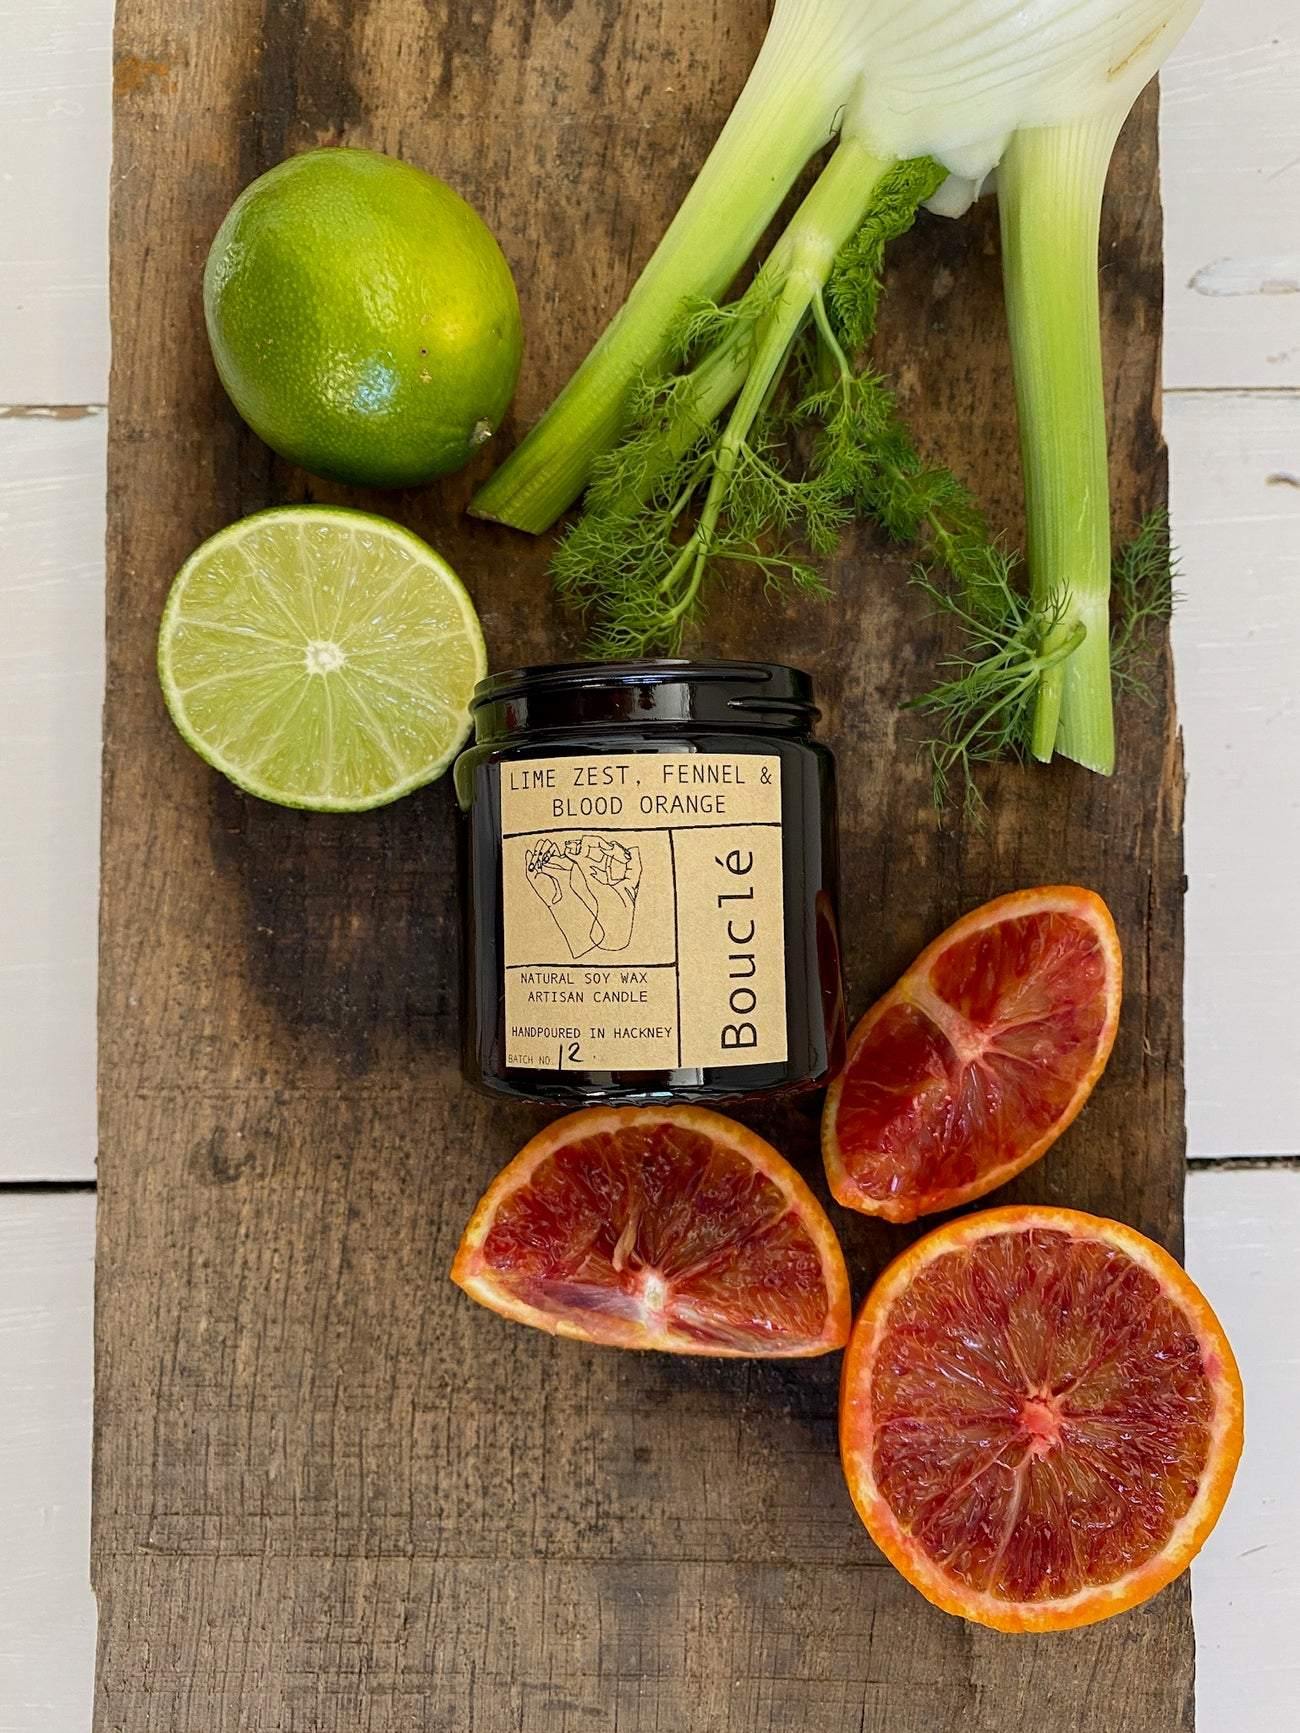 Lime Zest, Fennel & Blood Orange candle in amber glass apothecary jar, hand made in London and Brighton.